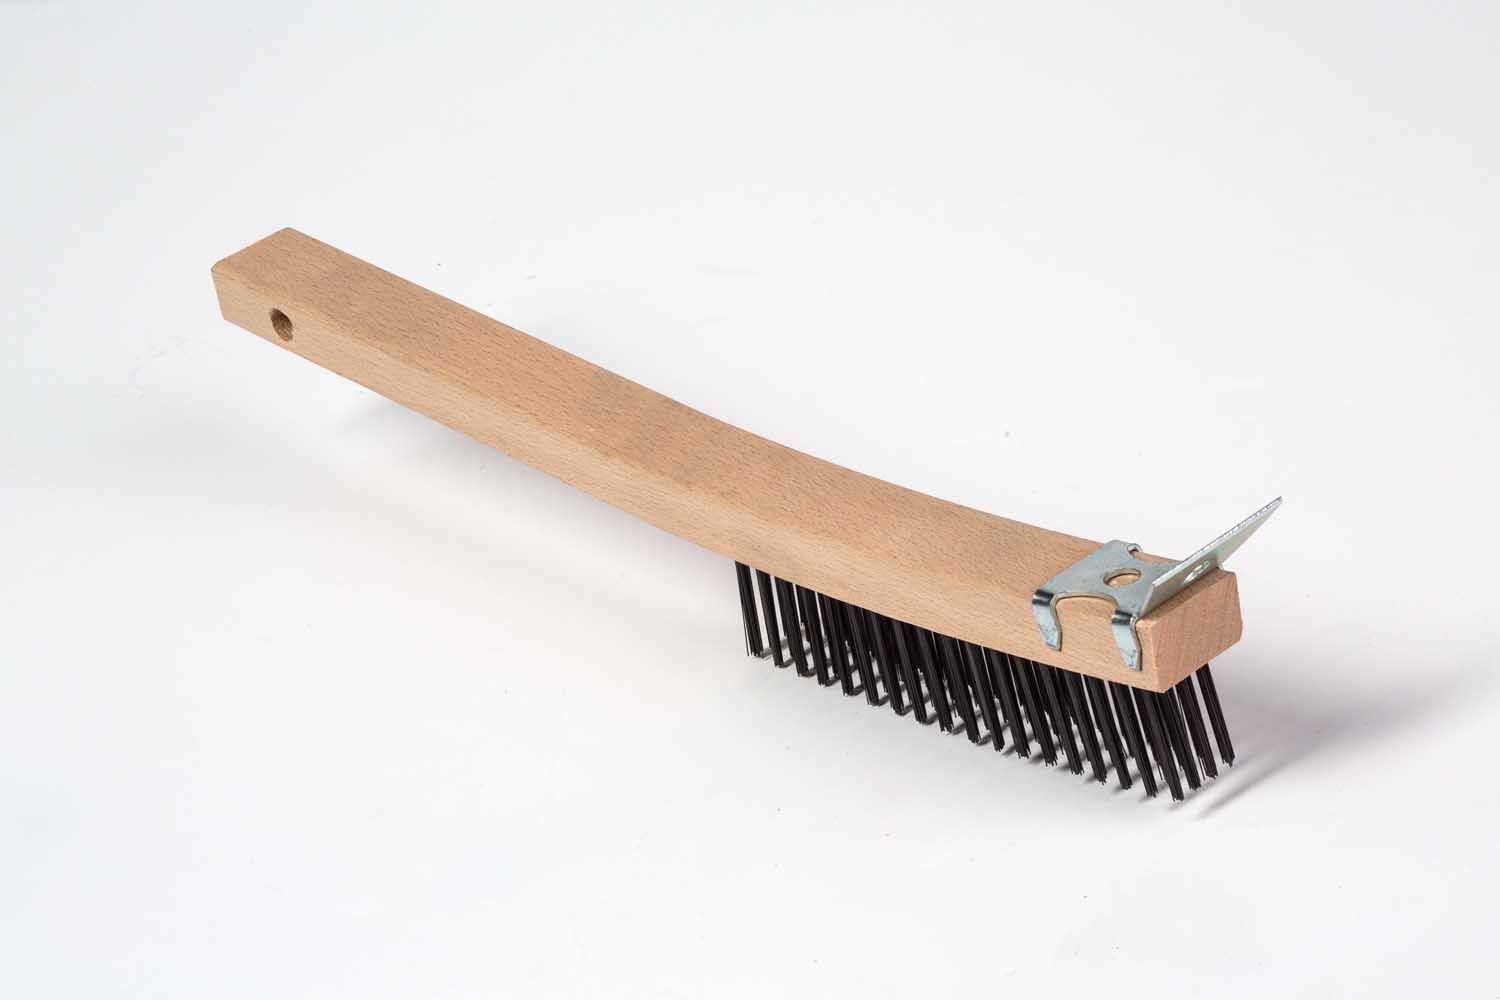 Steel Wire Brush with 4 Rows